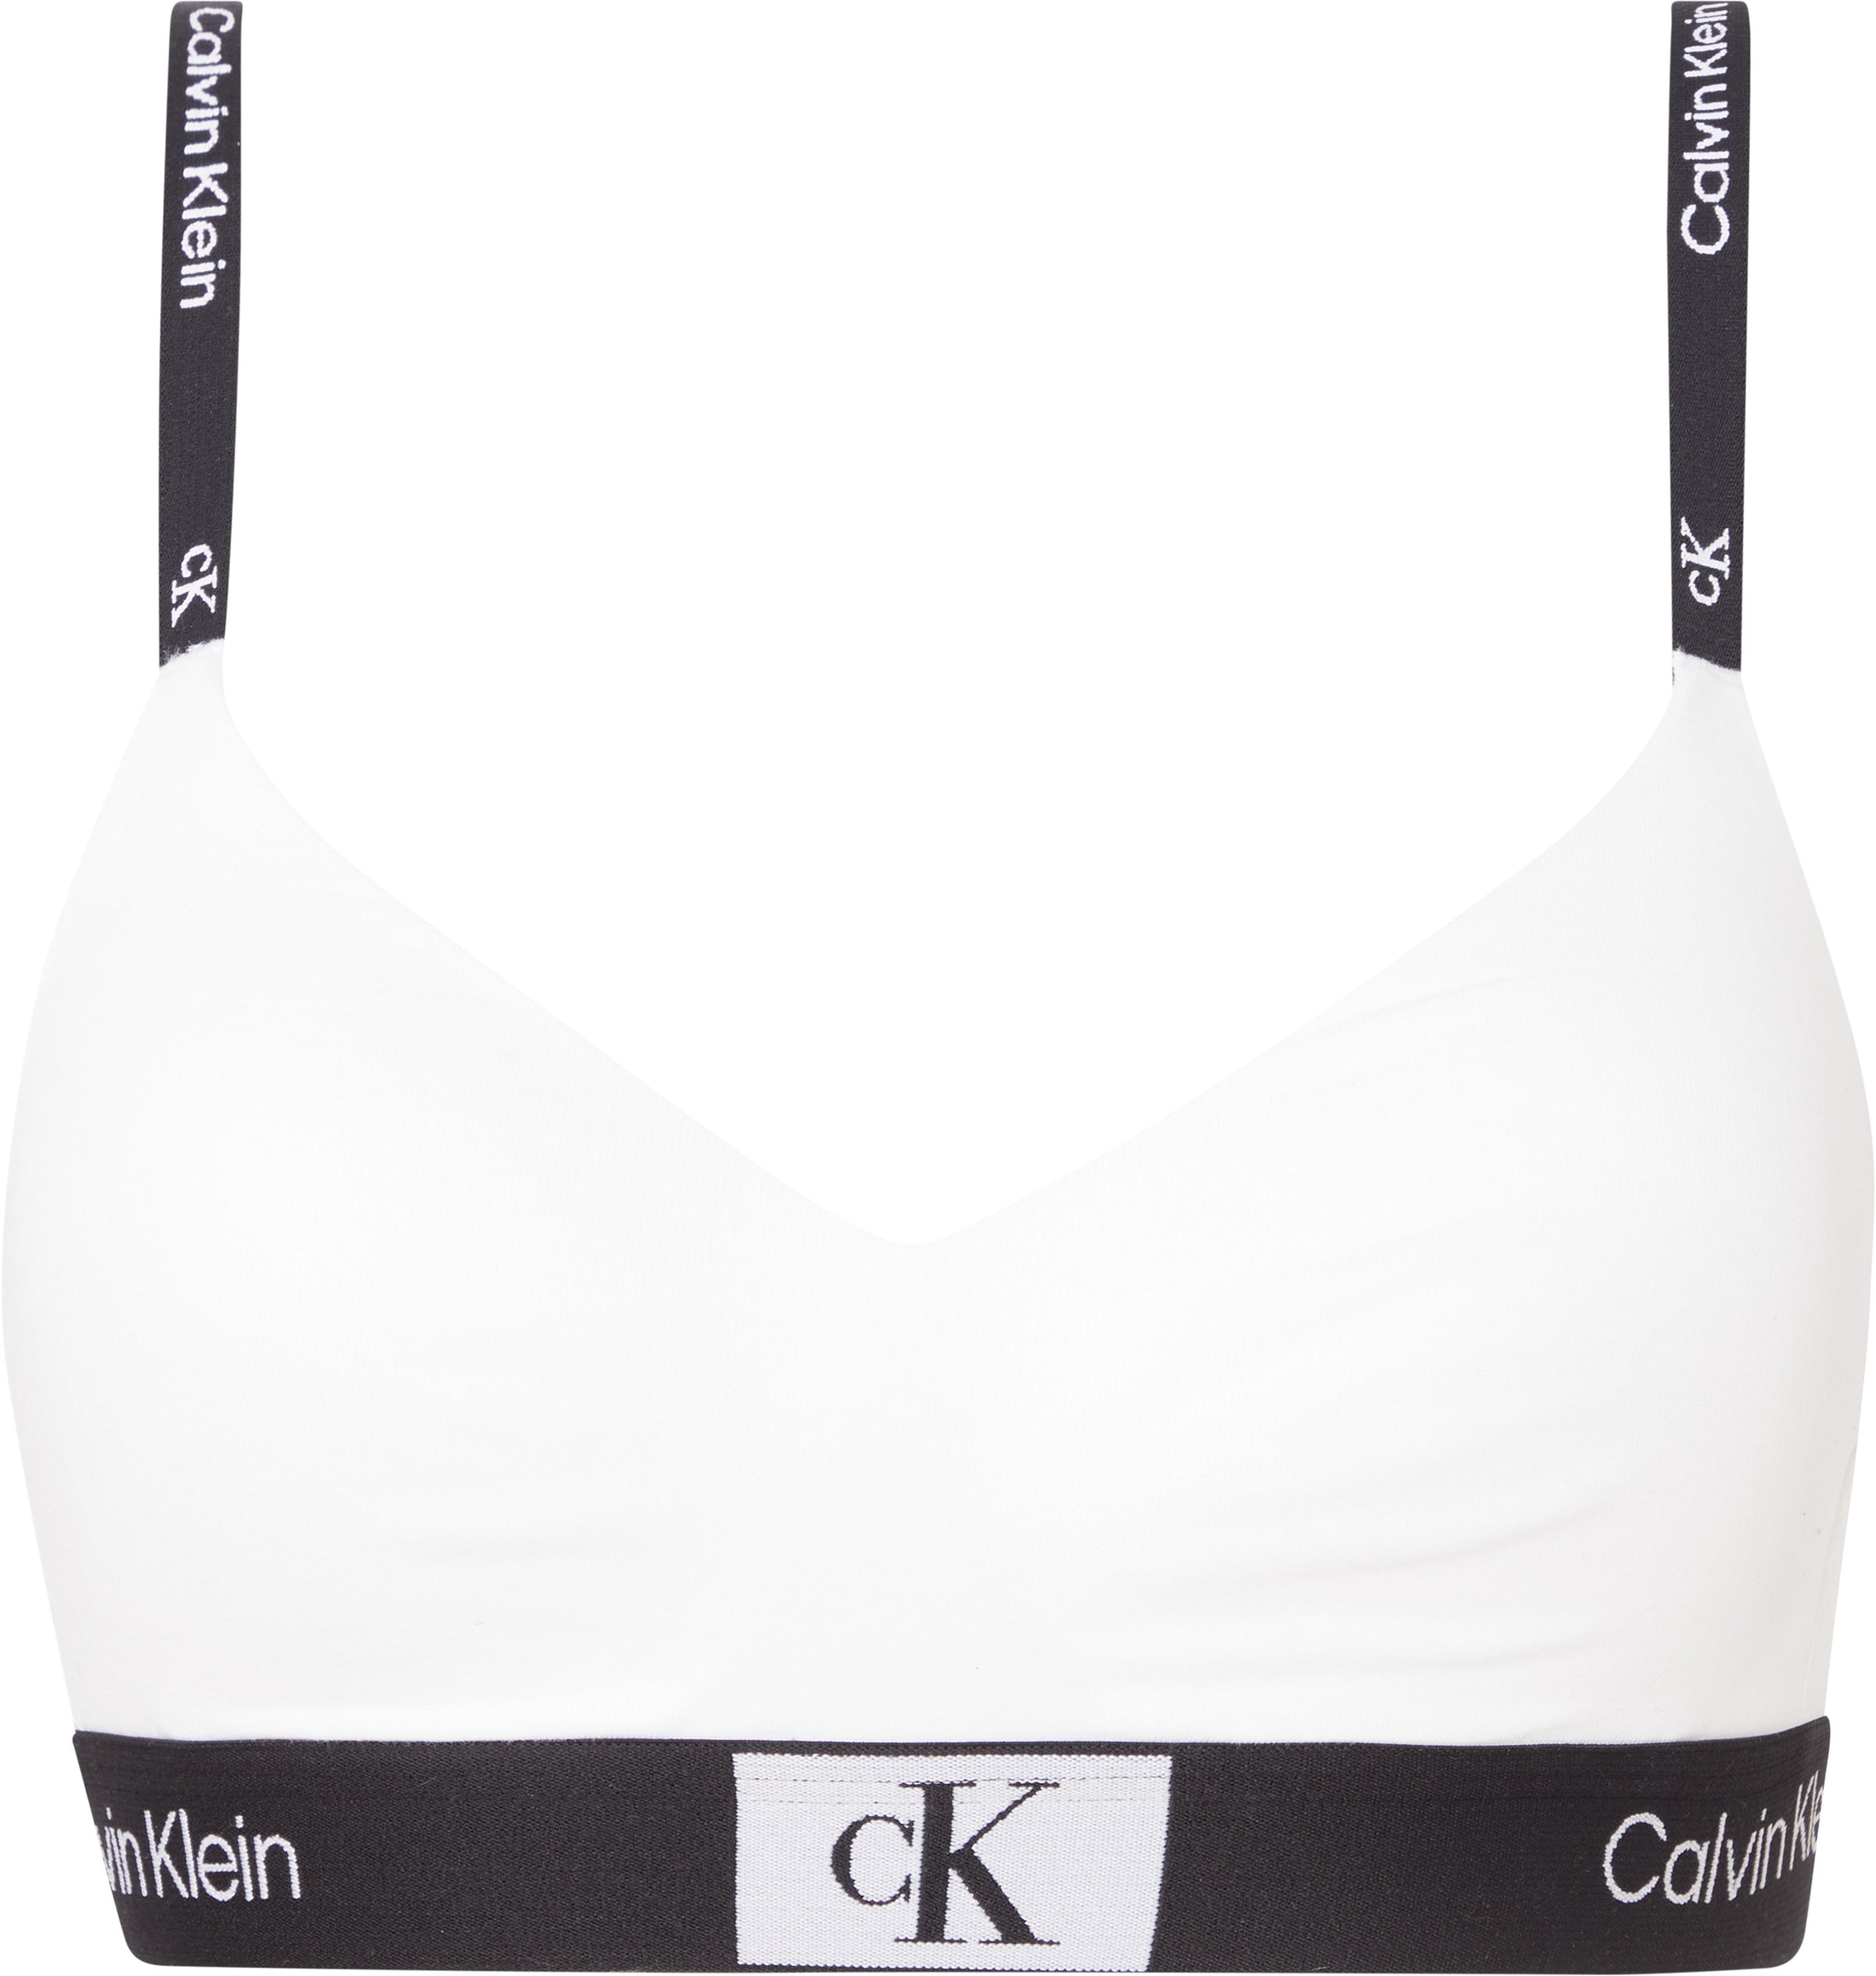 Buy Calvin Klein Structure Lightly Lined Triangle Bralette